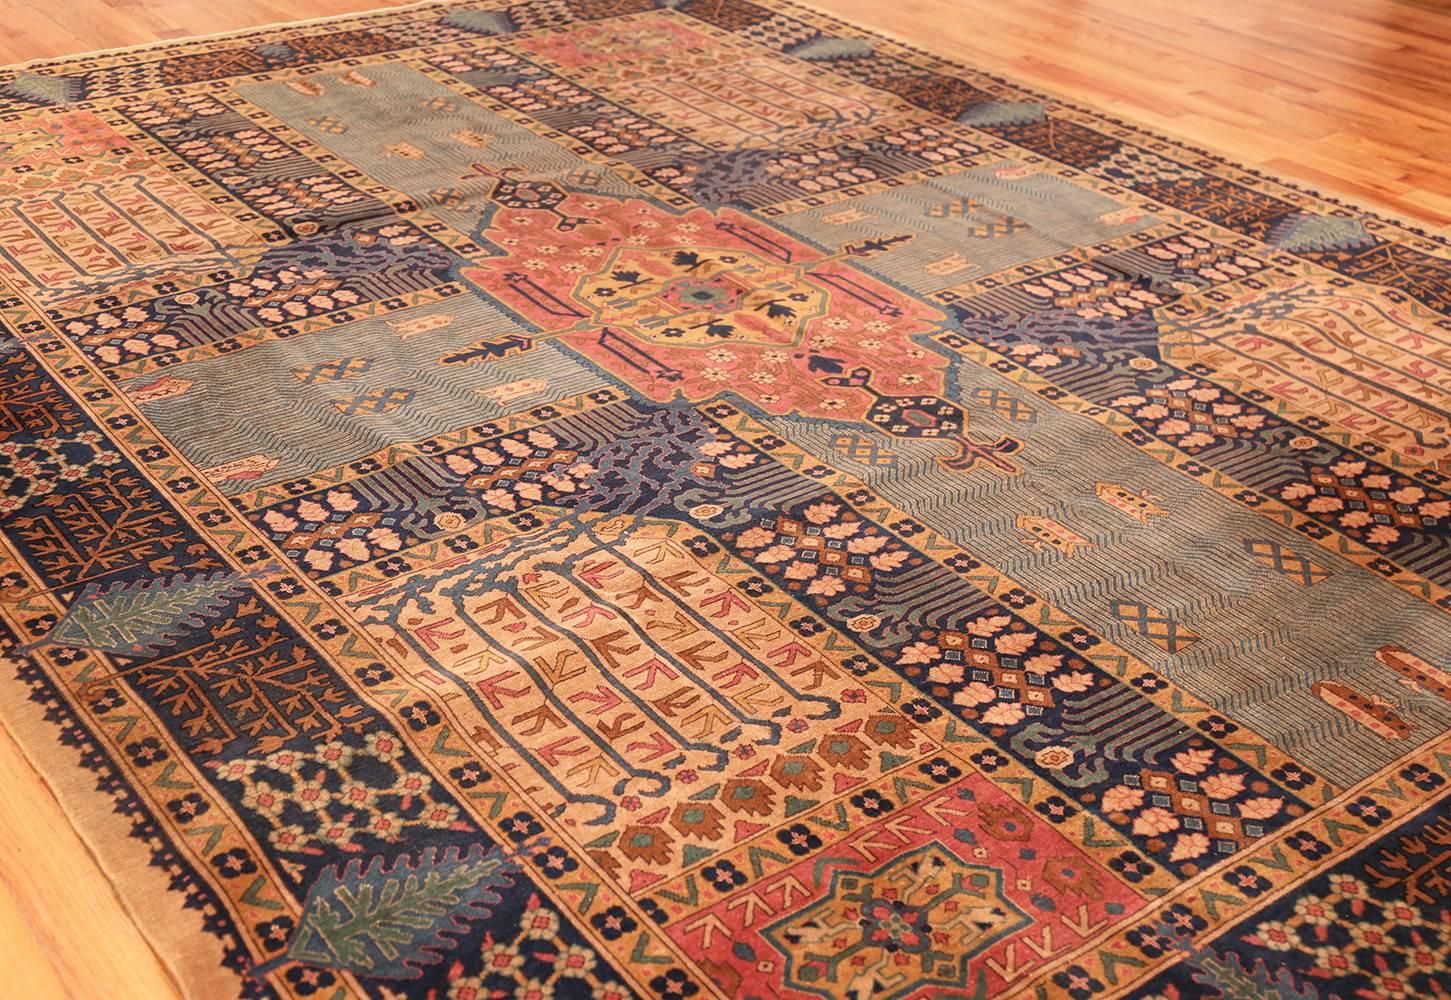 Wool Room-Sized Antique Indian Carpet